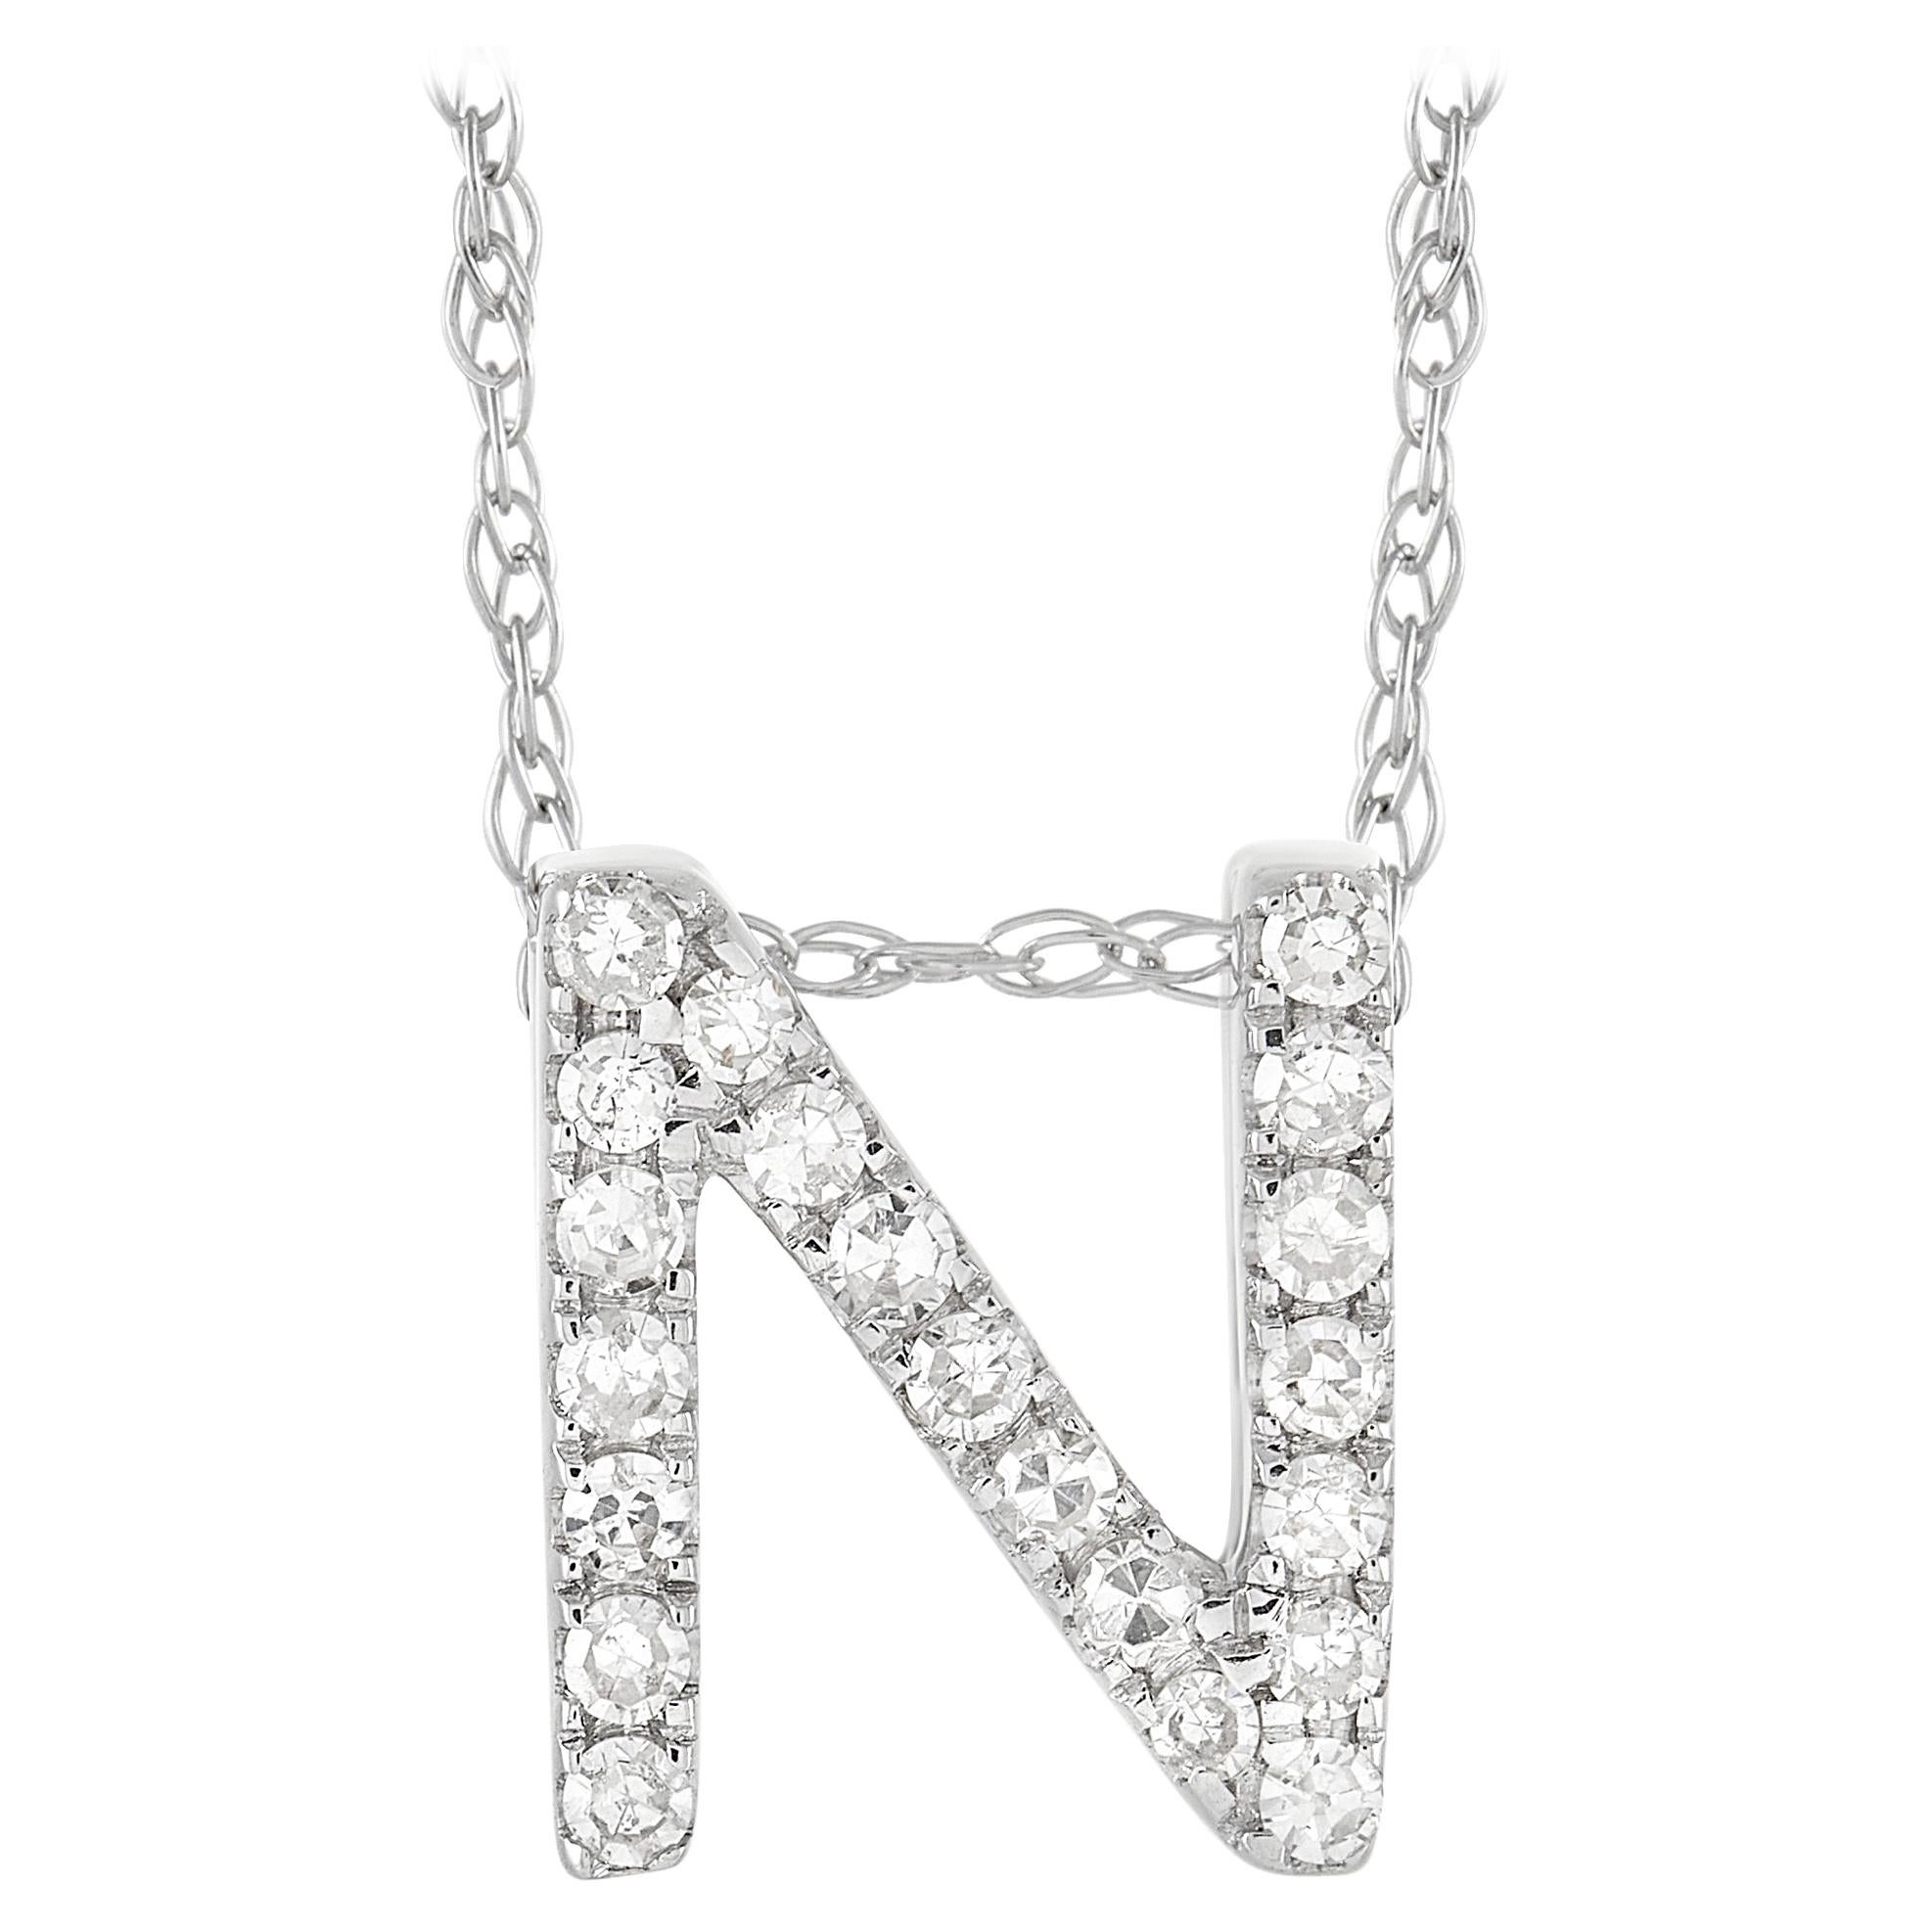 LB Exclusive 14K White Gold 0.10 Ct Diamond Initial ‘N’ Necklace